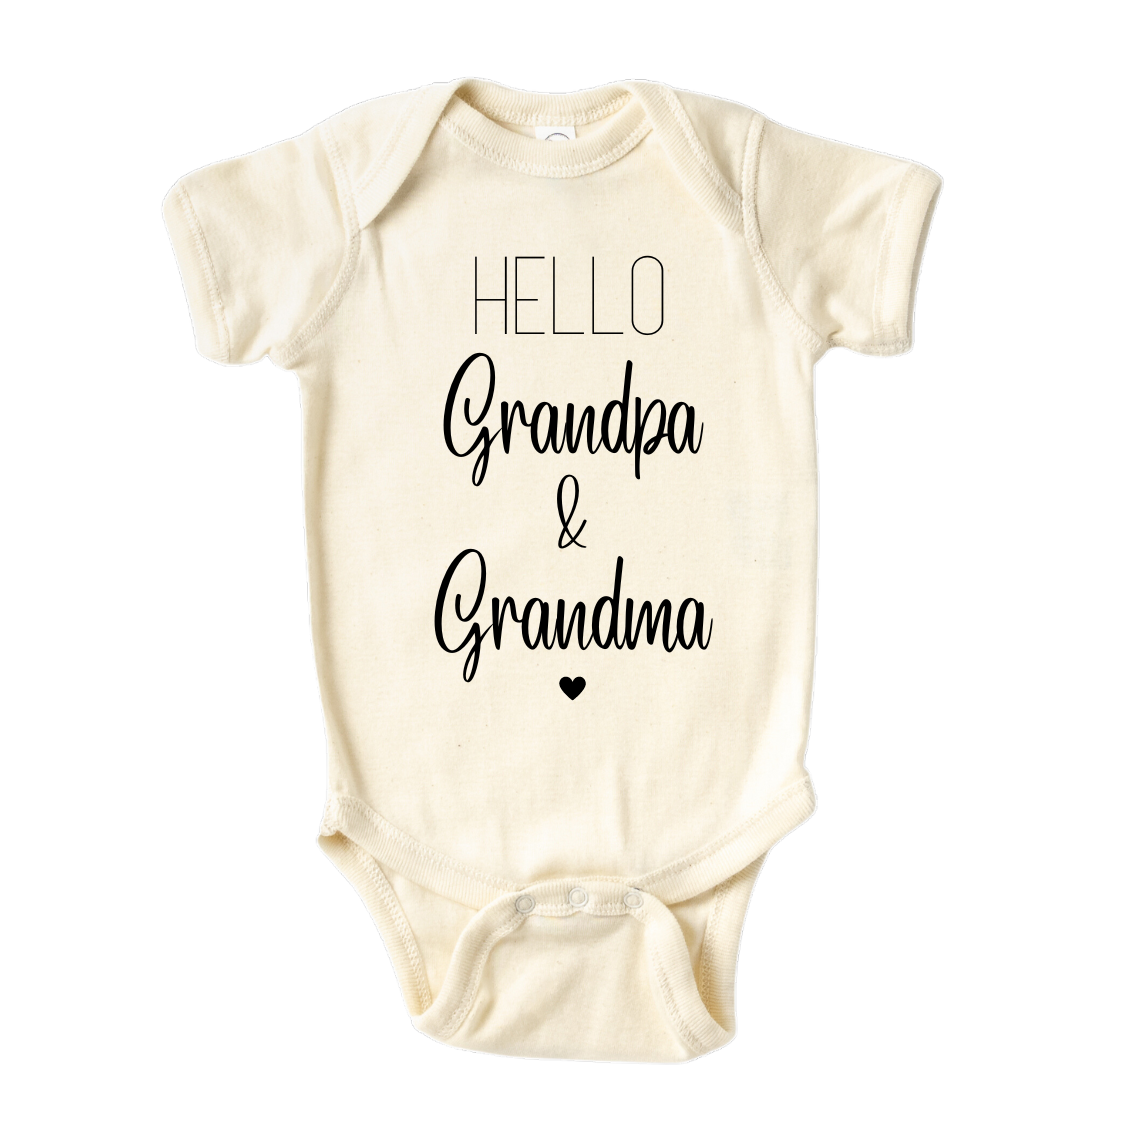 Cute Outfit for Baby Gift for Baby Shower Baby Onesie® Hello Grandpa & Grandma